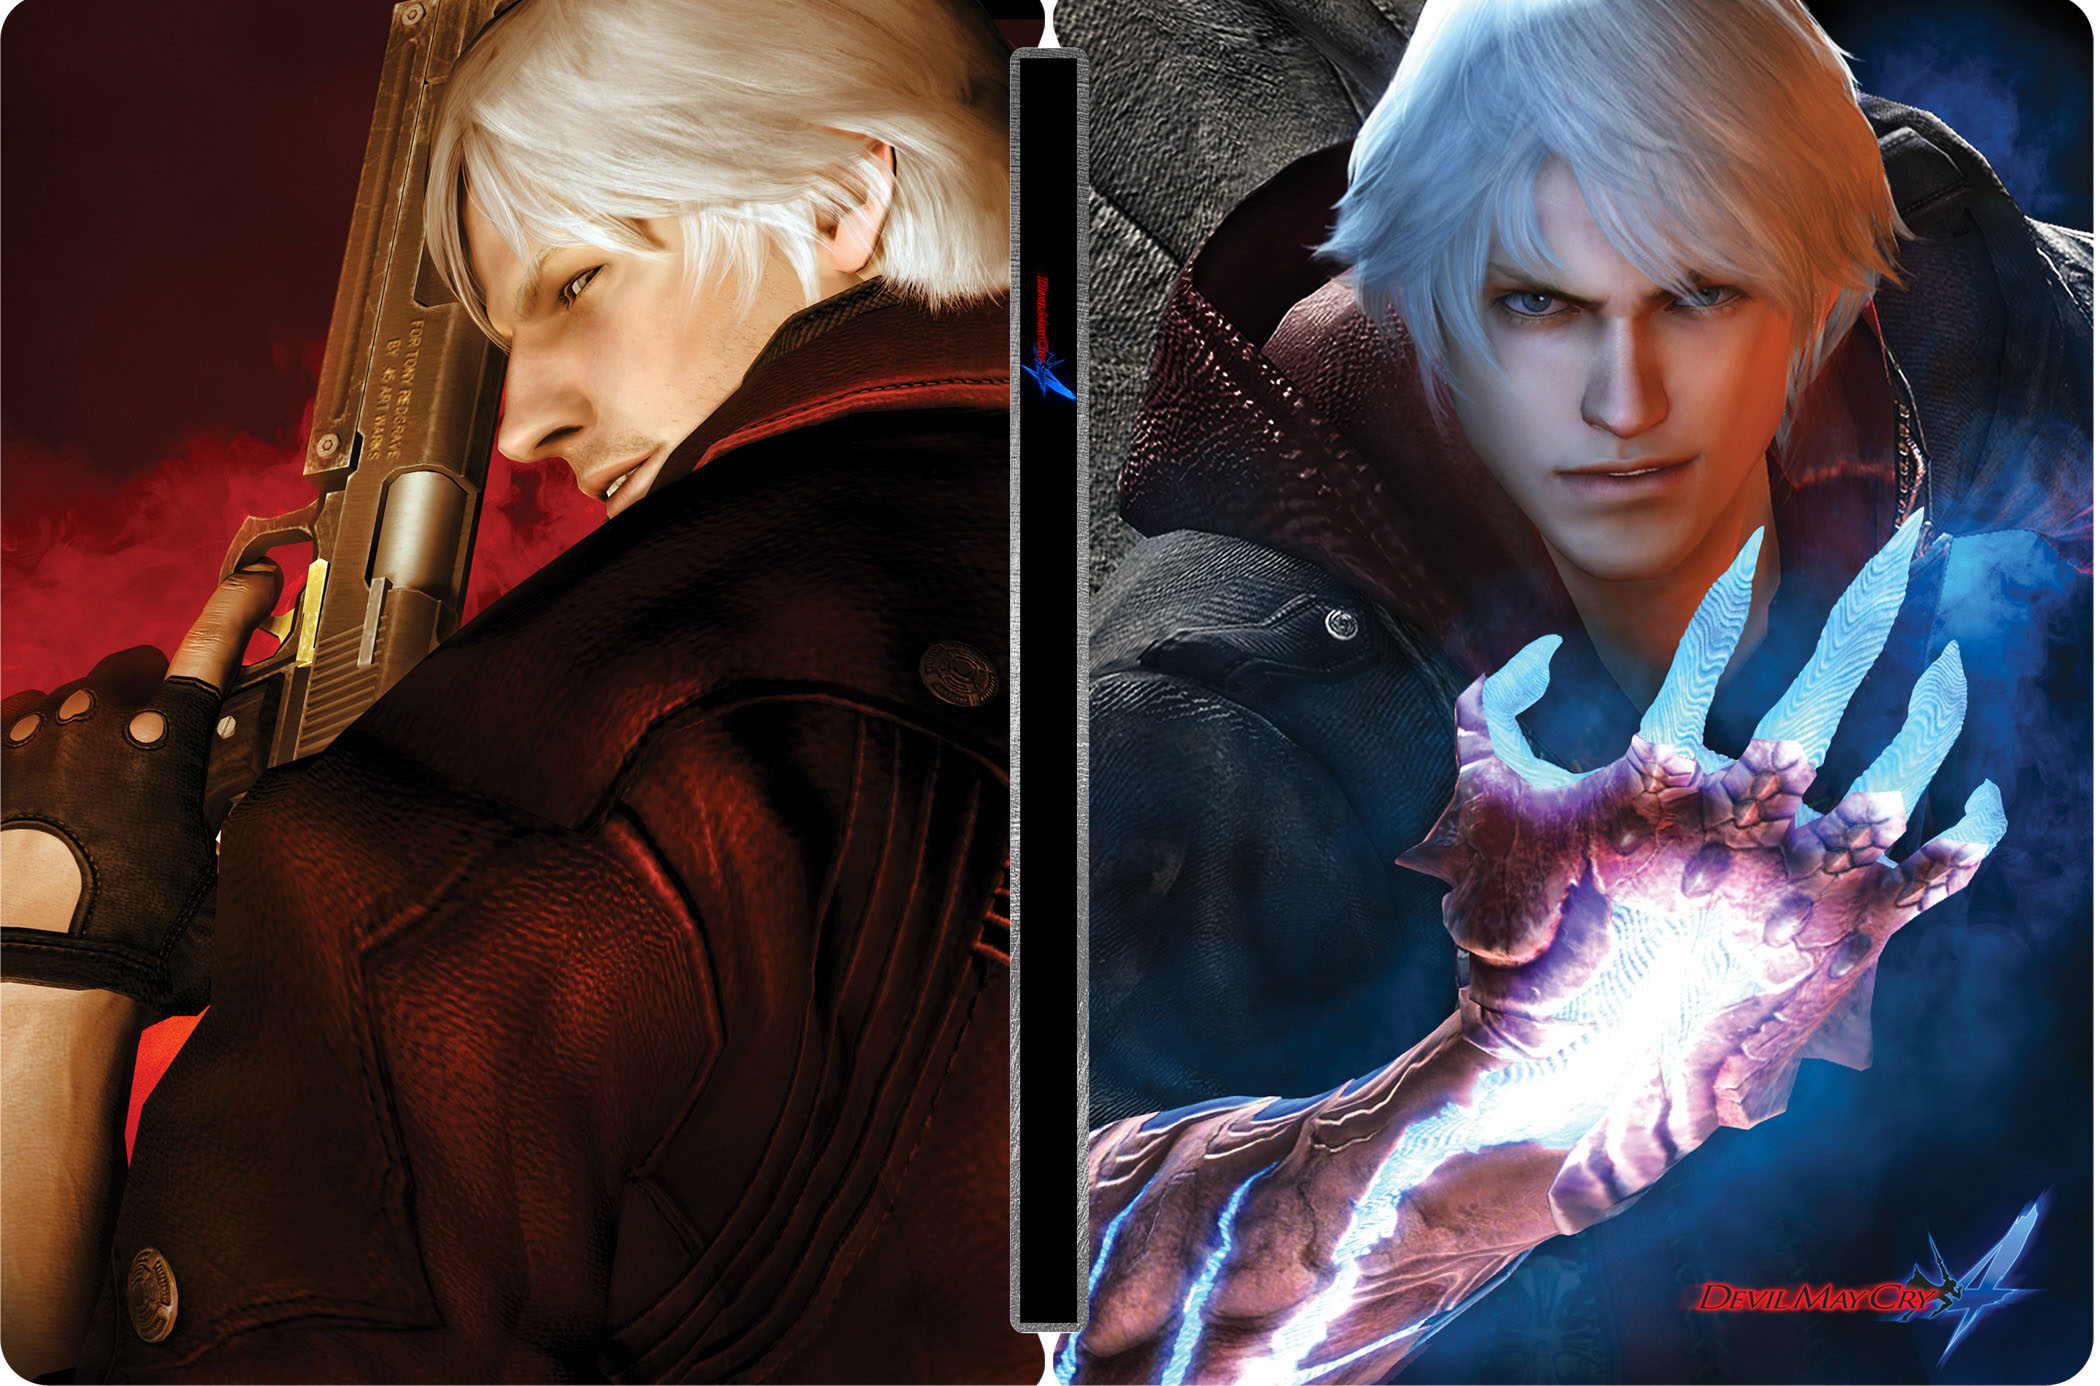 Devil May Cry 4 Nero Face